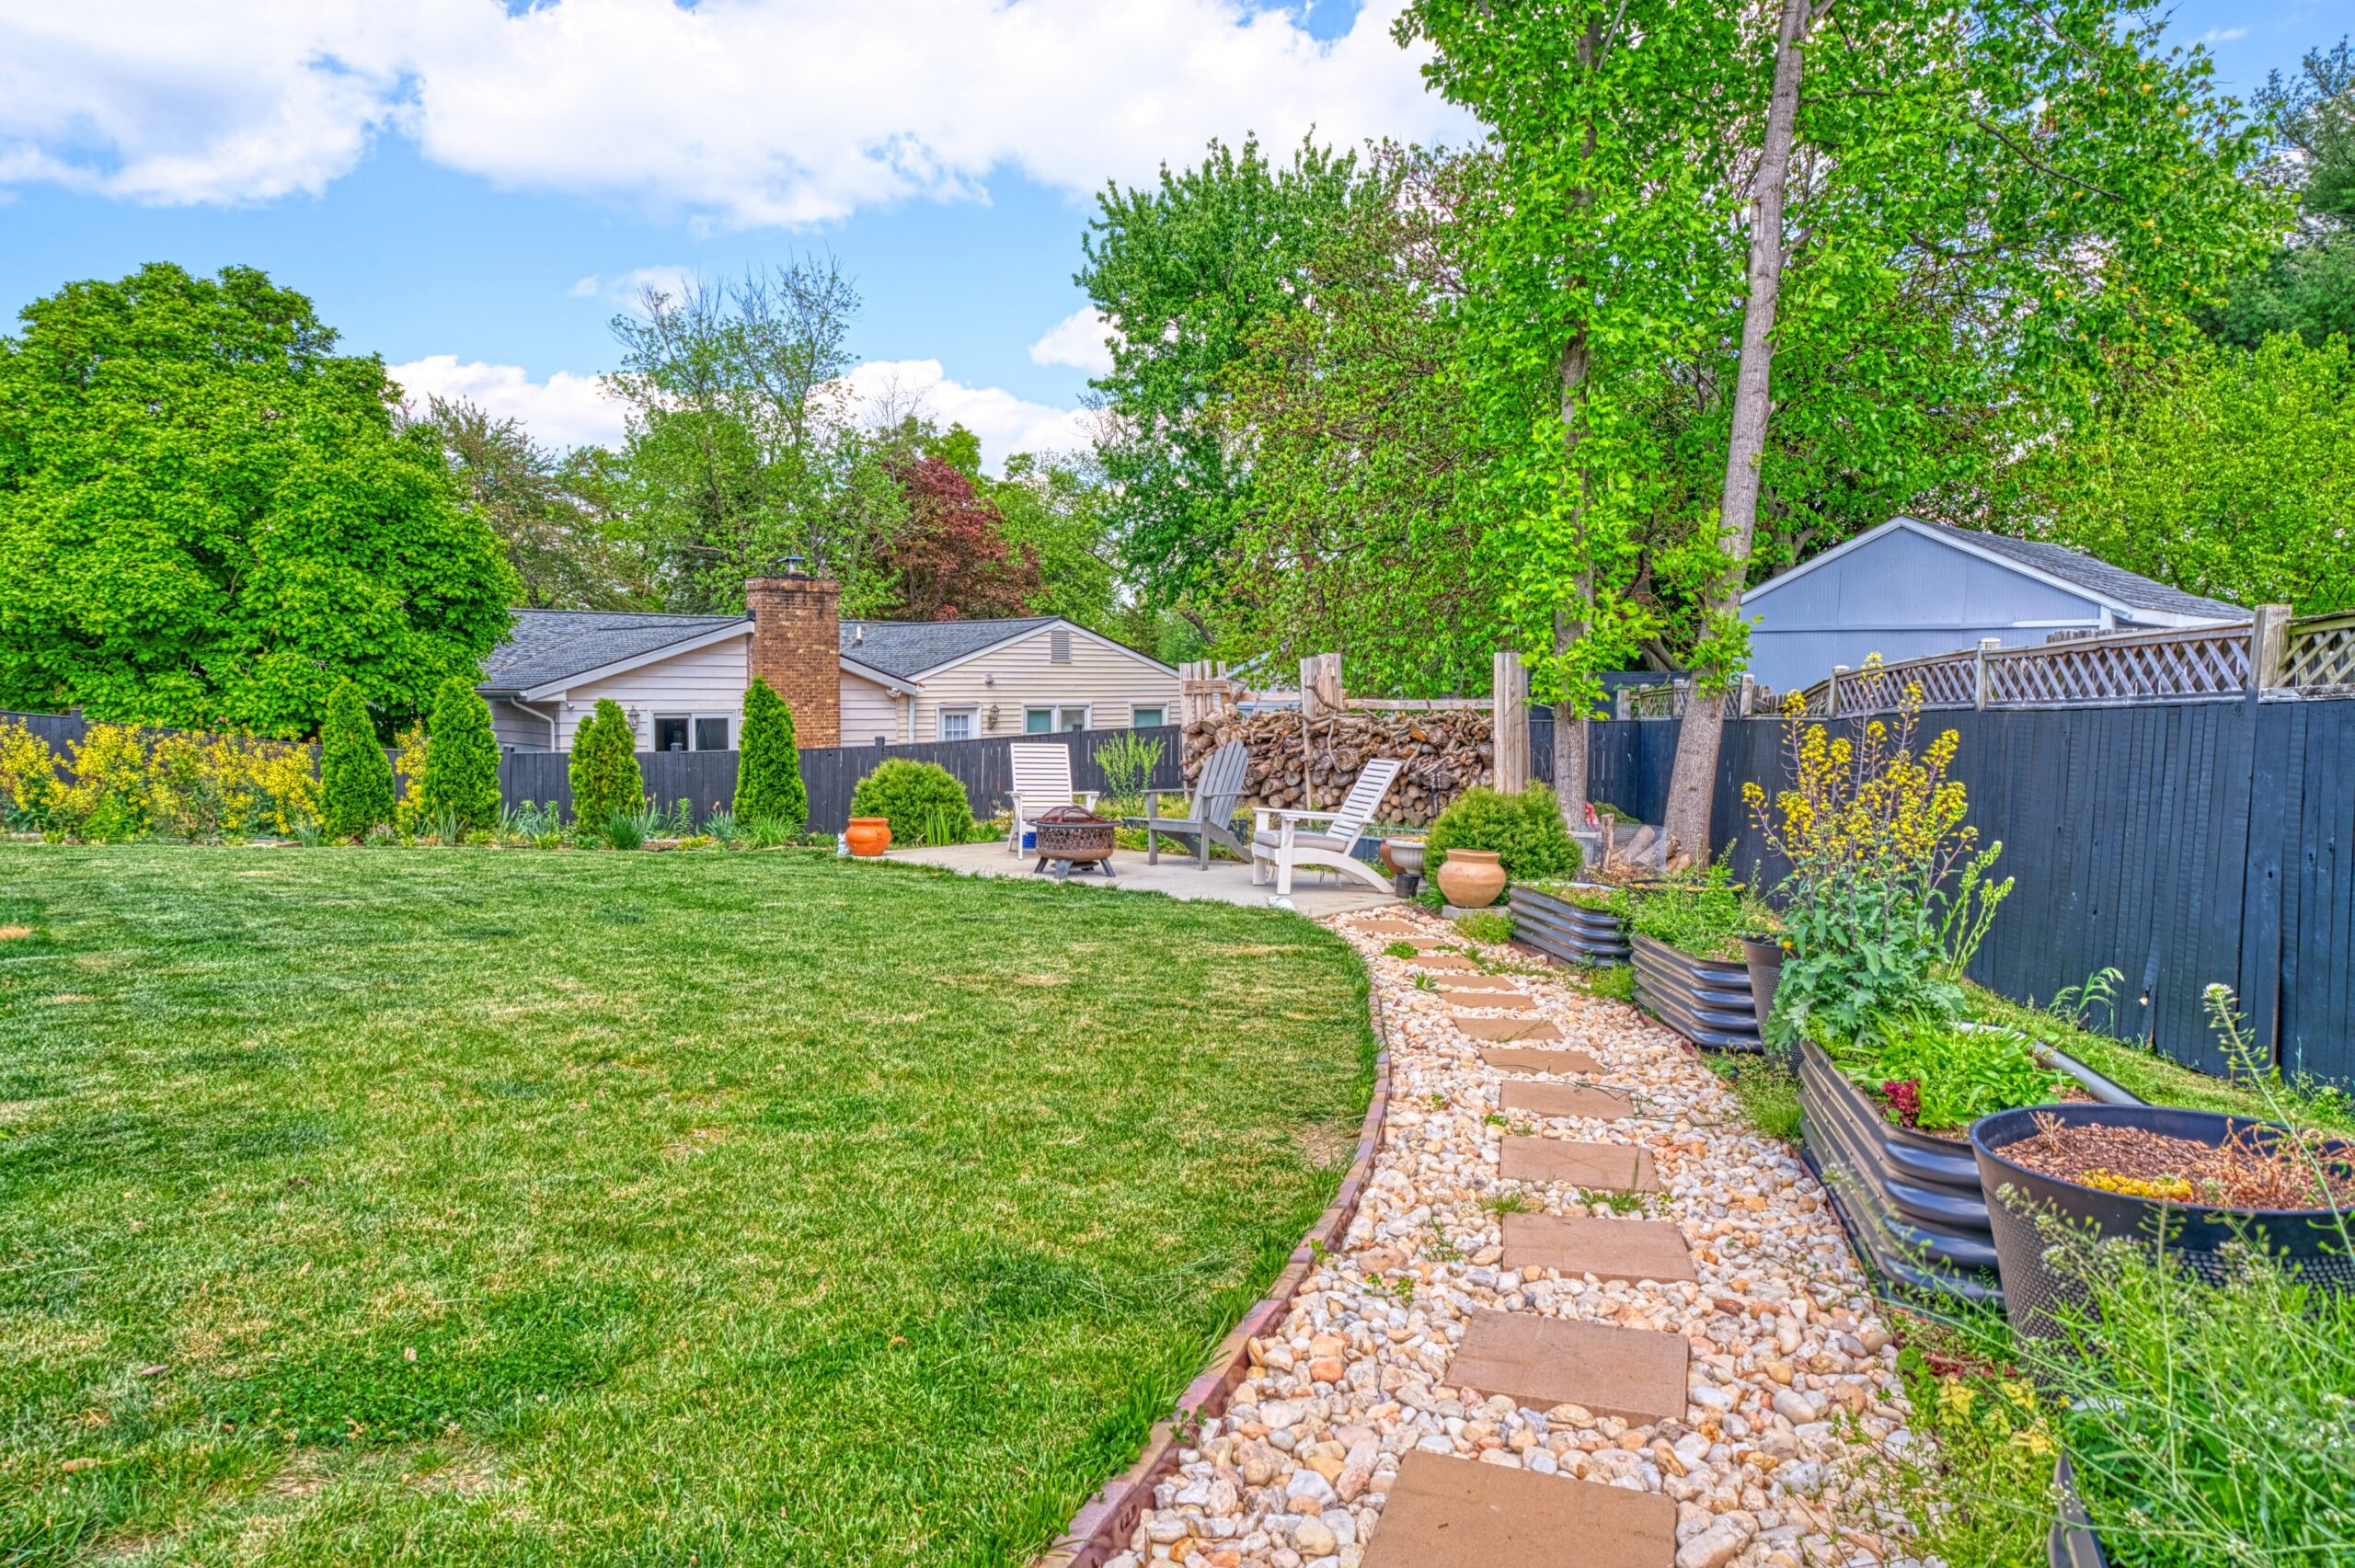 professional exterior photo of 102 S Harrison Road, Sterling, VA - showing the backyard pebble path leading to the separate patio with firepit